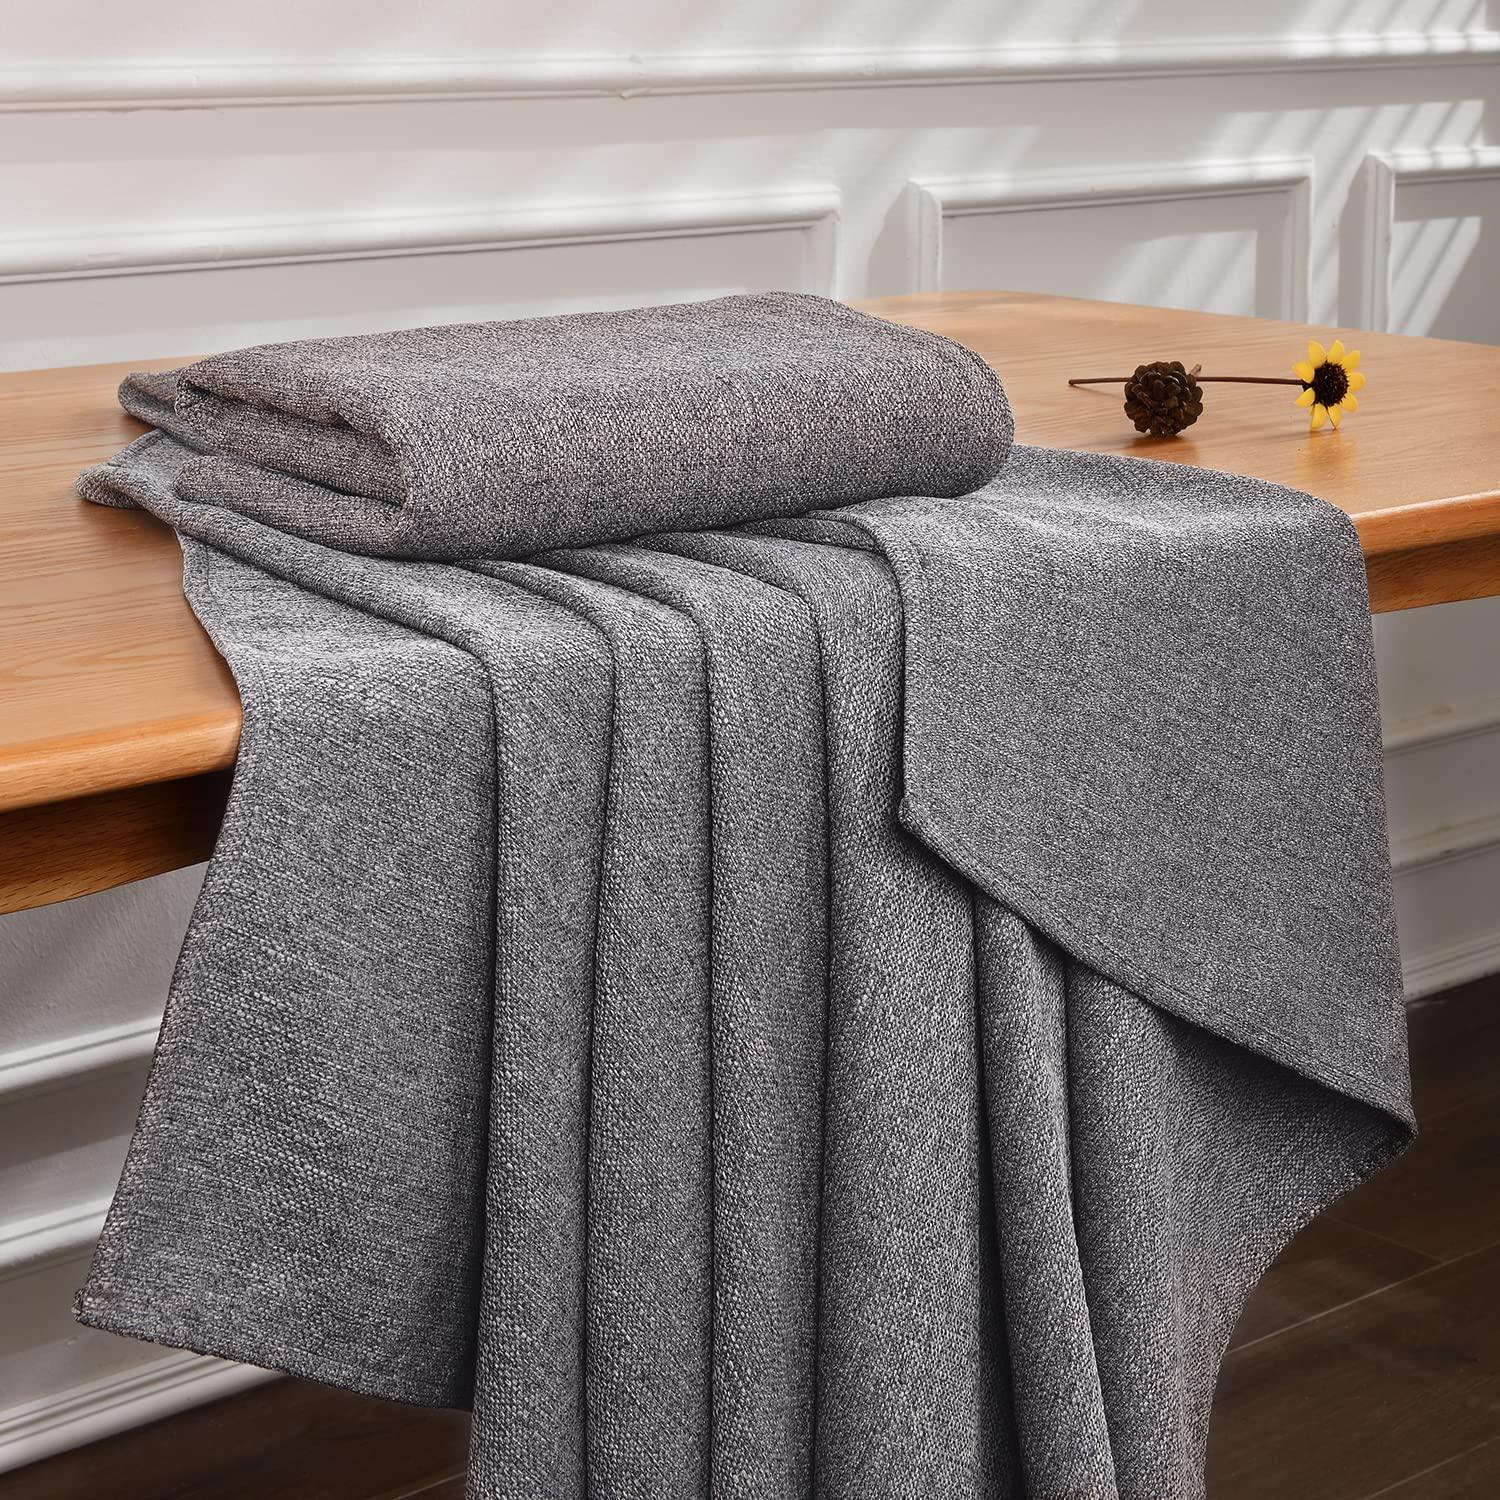 LUOLUO Rectangular Tablecloth Waterproof Thick Faux Linen Wrinkle Resistant Table Cover for Dining Kitchen Home Restaurant (Grey, 140 x 240cm) 3